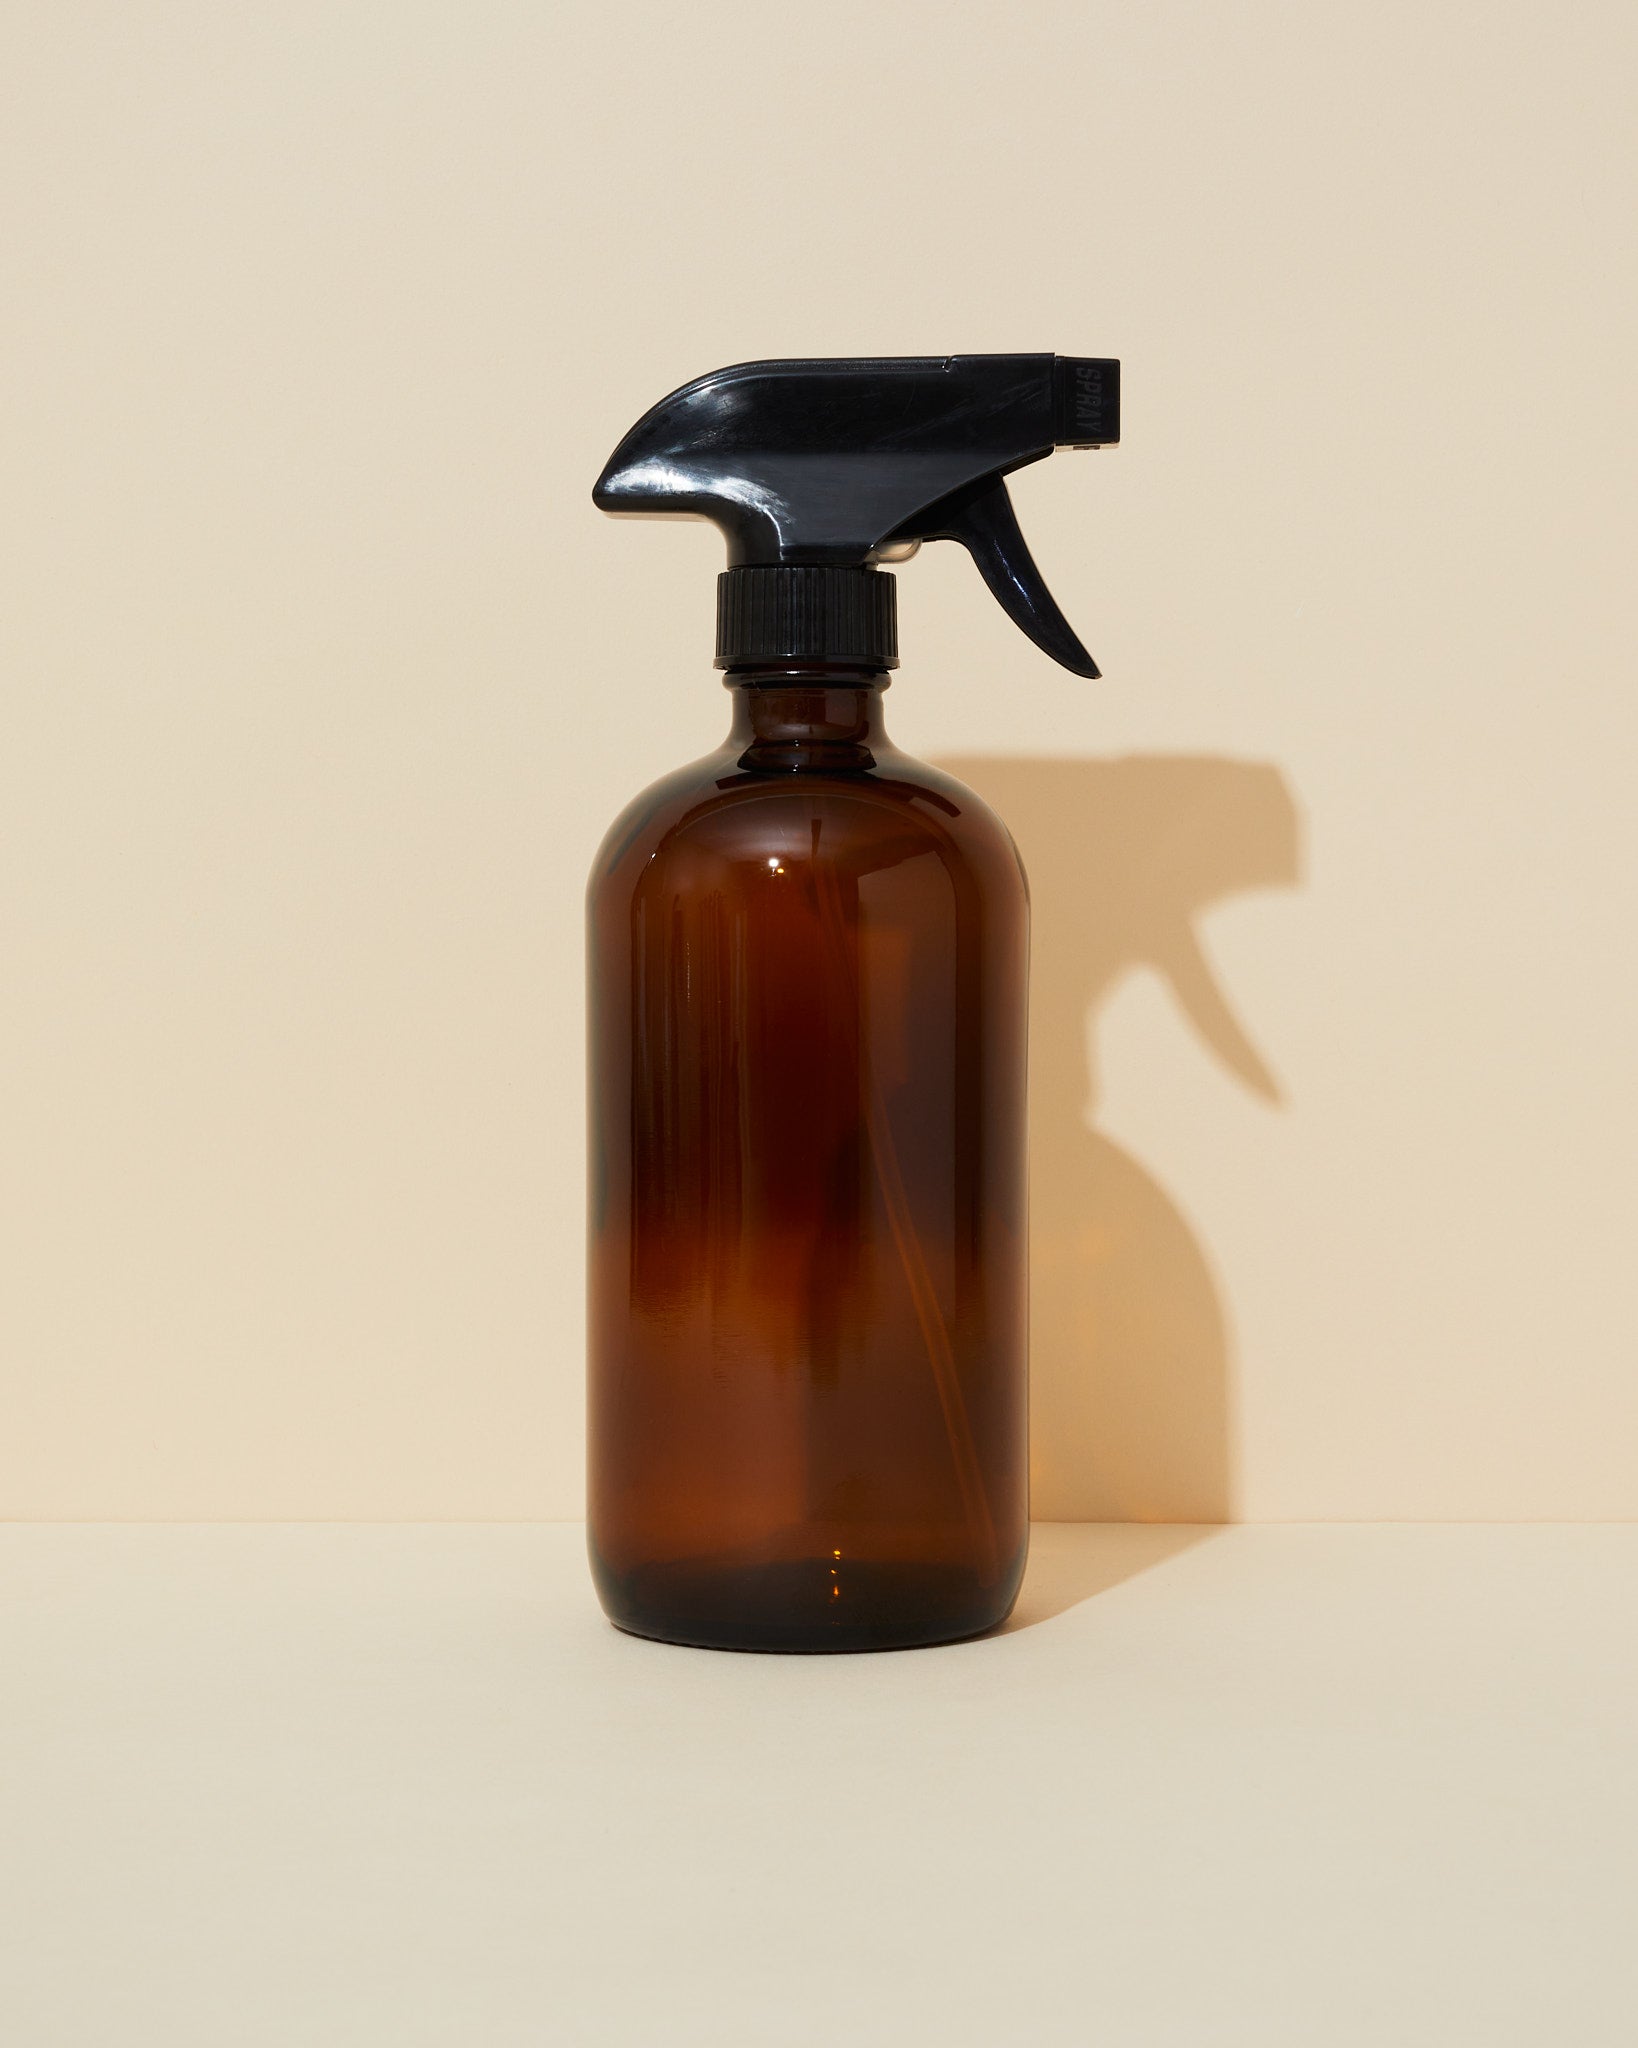 16oz Amber Glass Bottle with White Lotion Pump